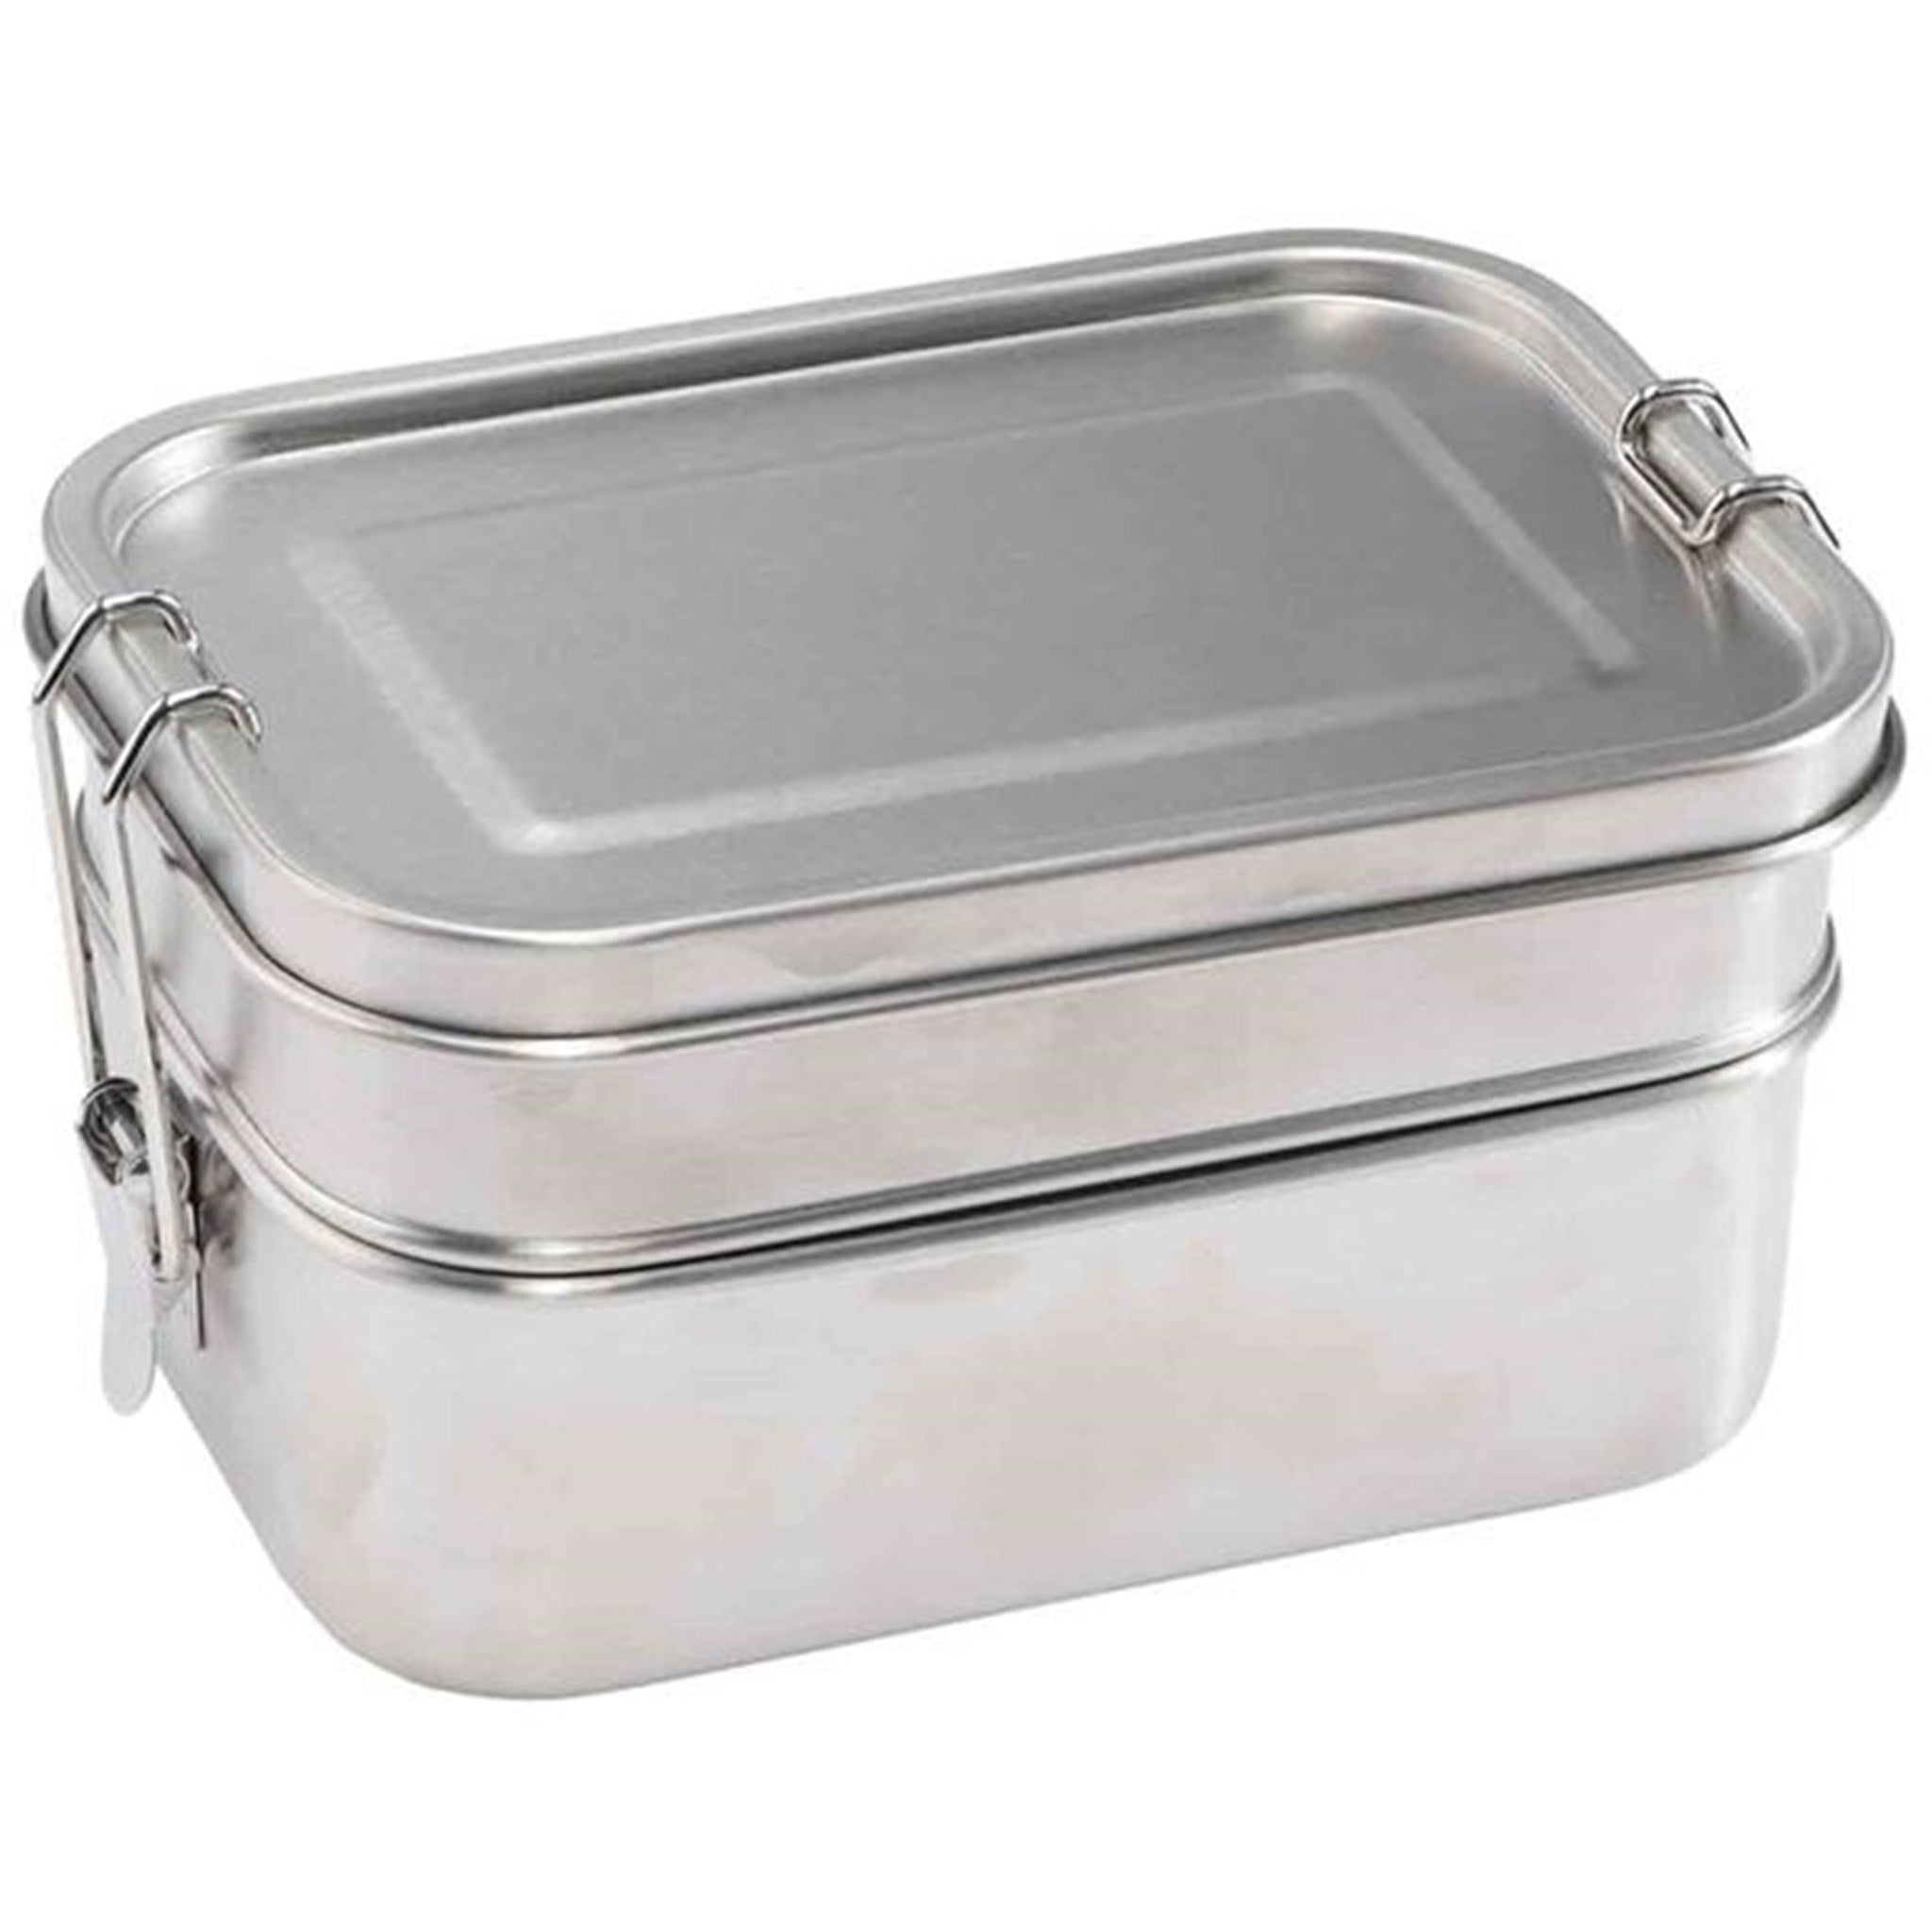 Haps Nordic Lunch Box Double Layer Steel